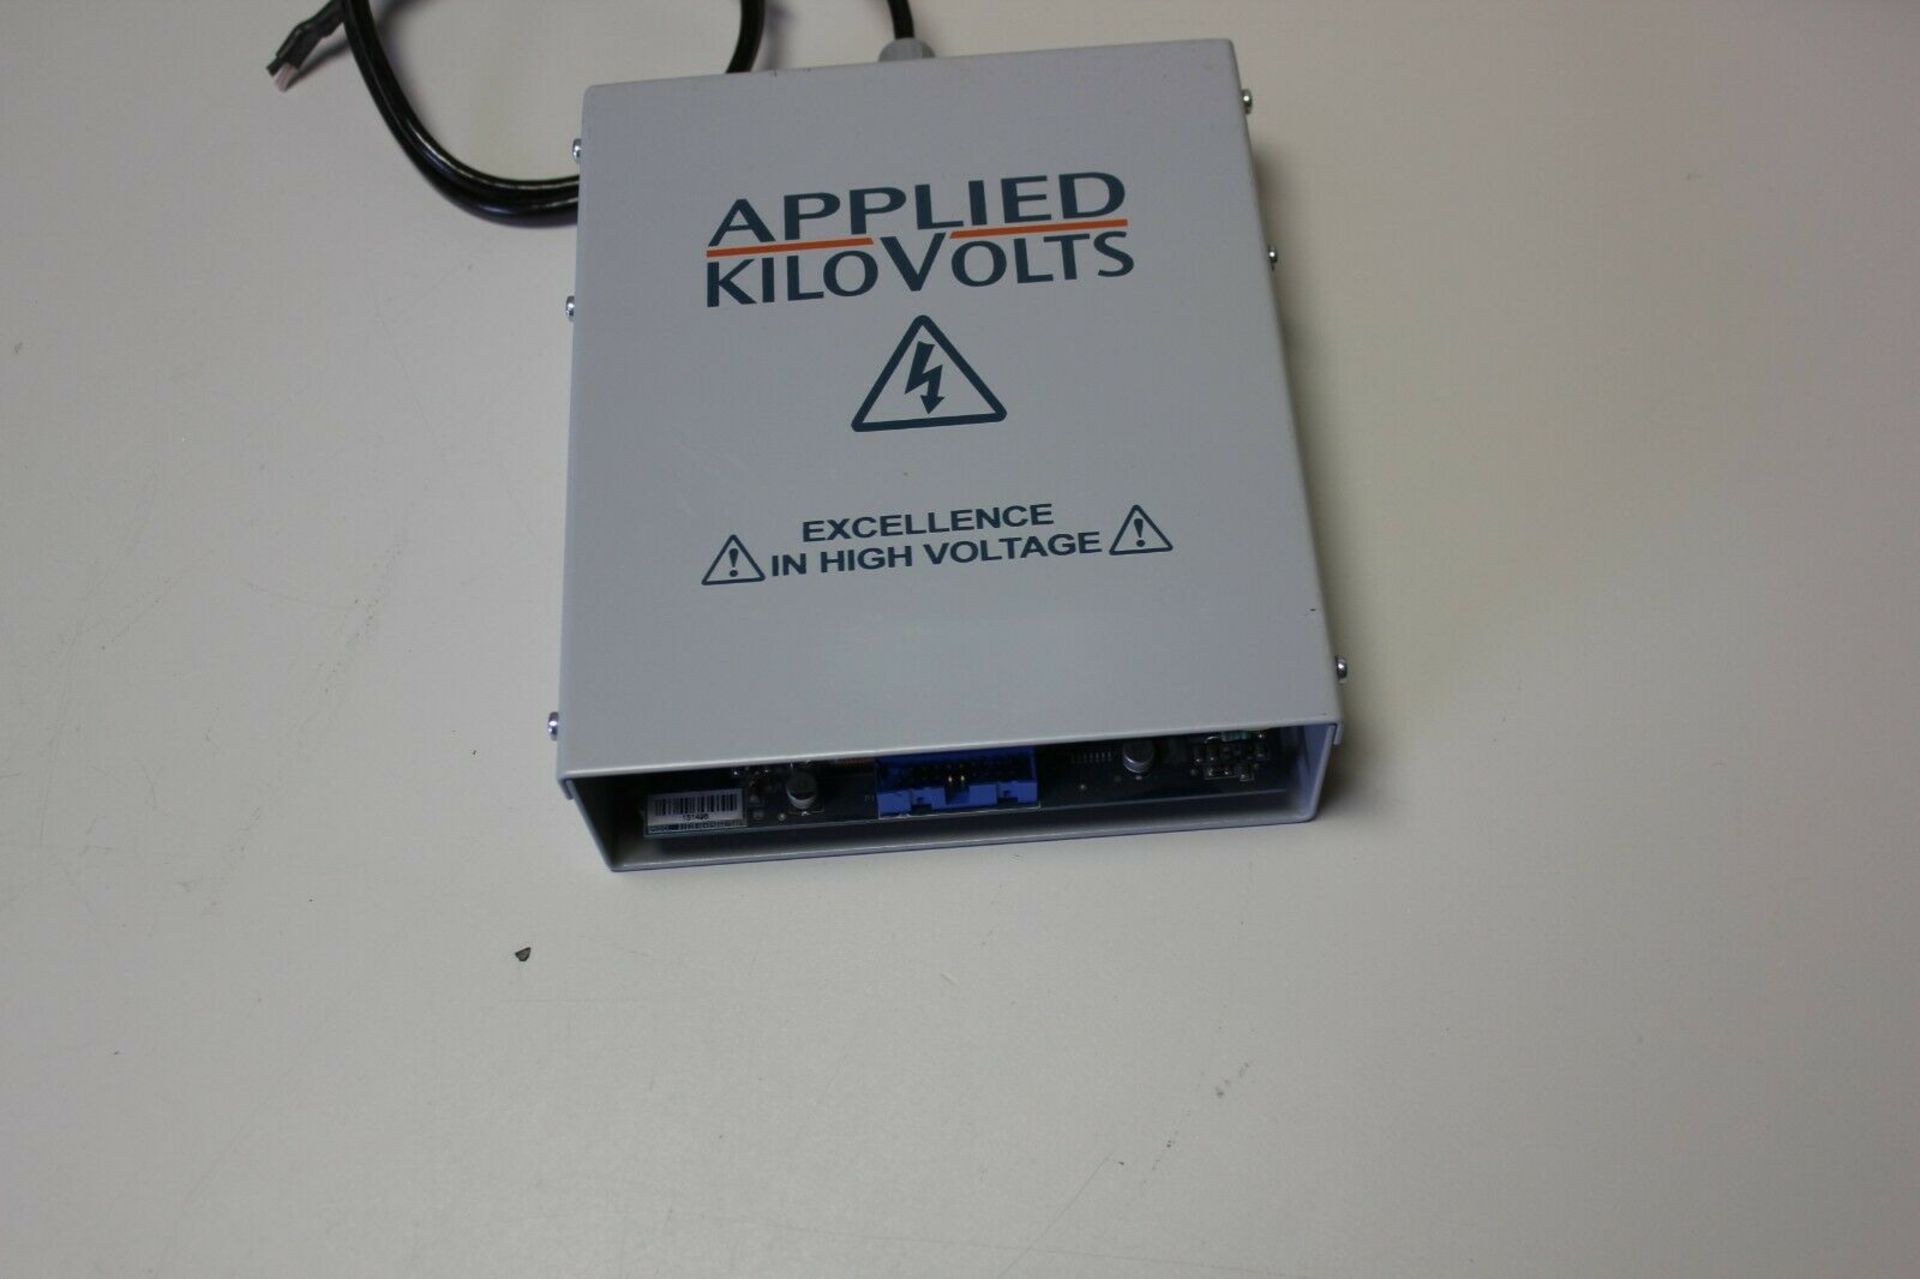 APPLIED KILOVOLTS 24V HIGH VOLTAGE POWER SUPPLY - Image 2 of 6